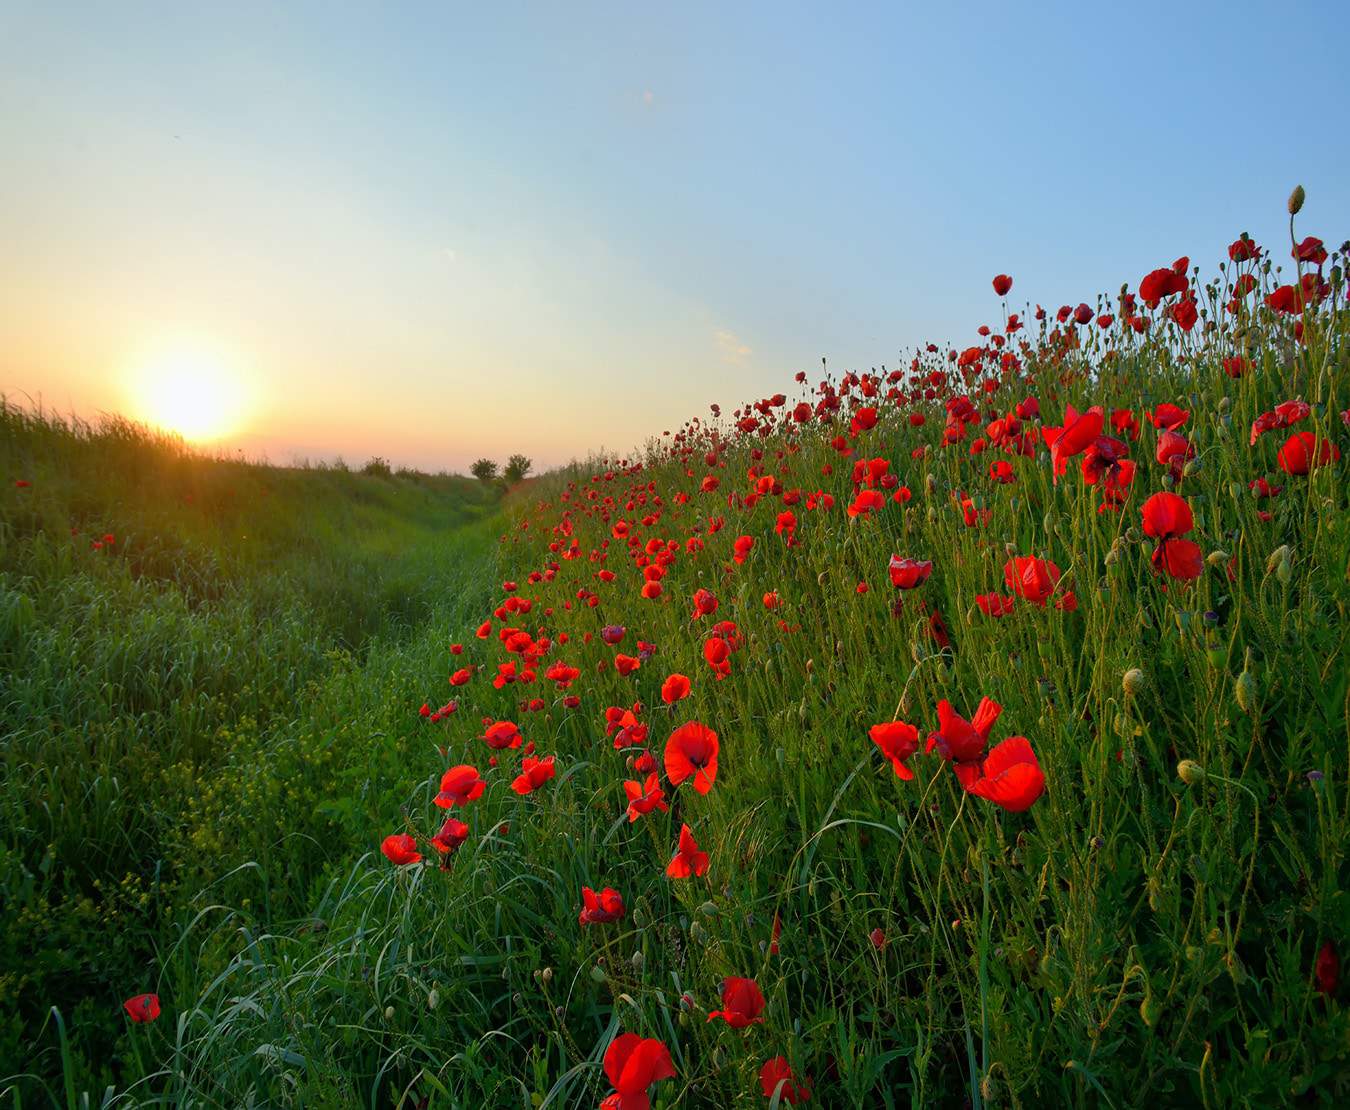 poppies blooming in a field at sunset Photo by Laurentiu Jordache on Unsplash